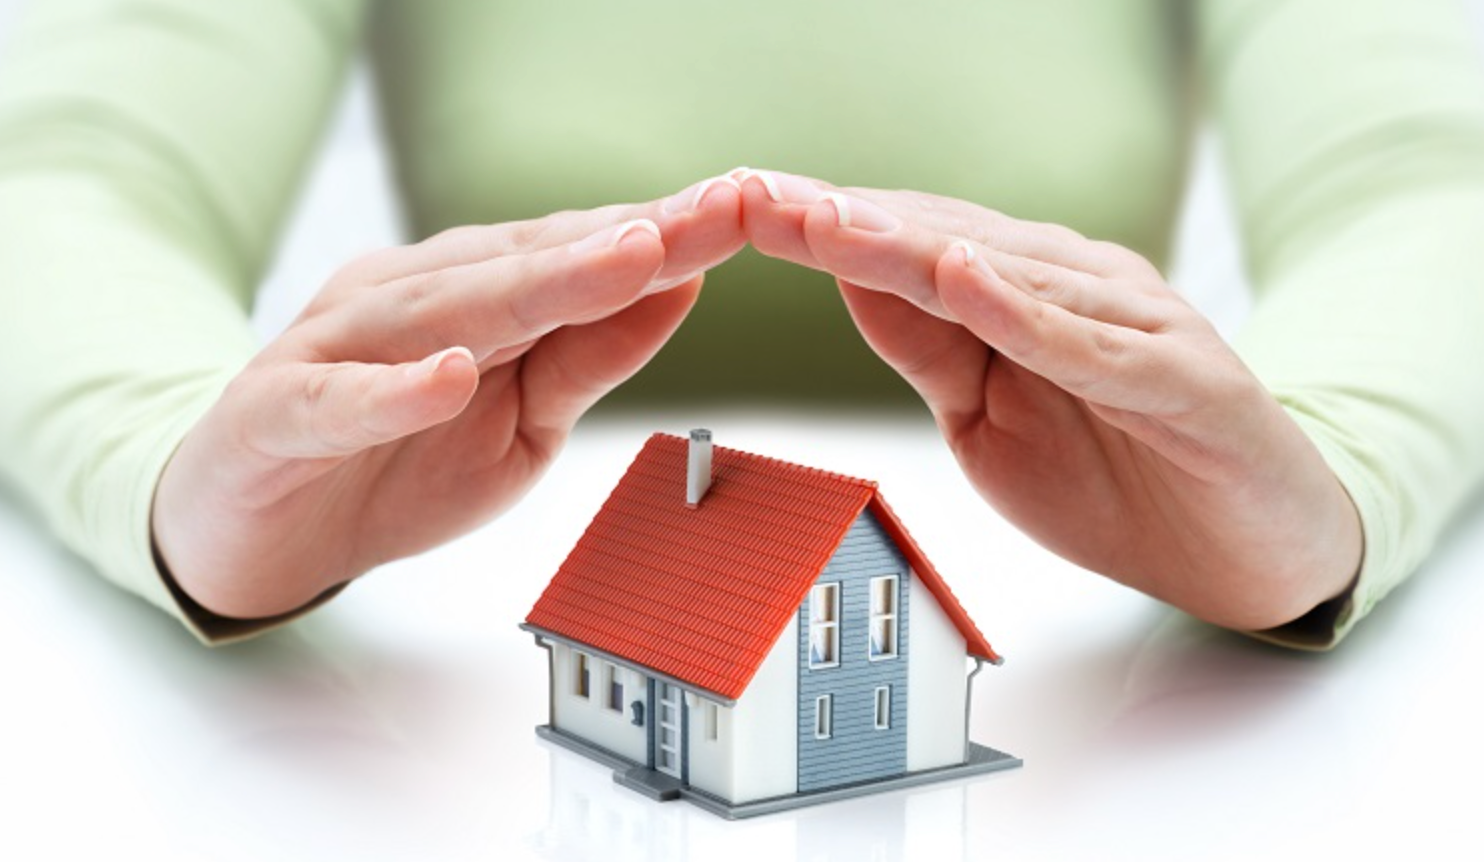 LMI allows assists first home buyers with entering the market and getting into a home sooner